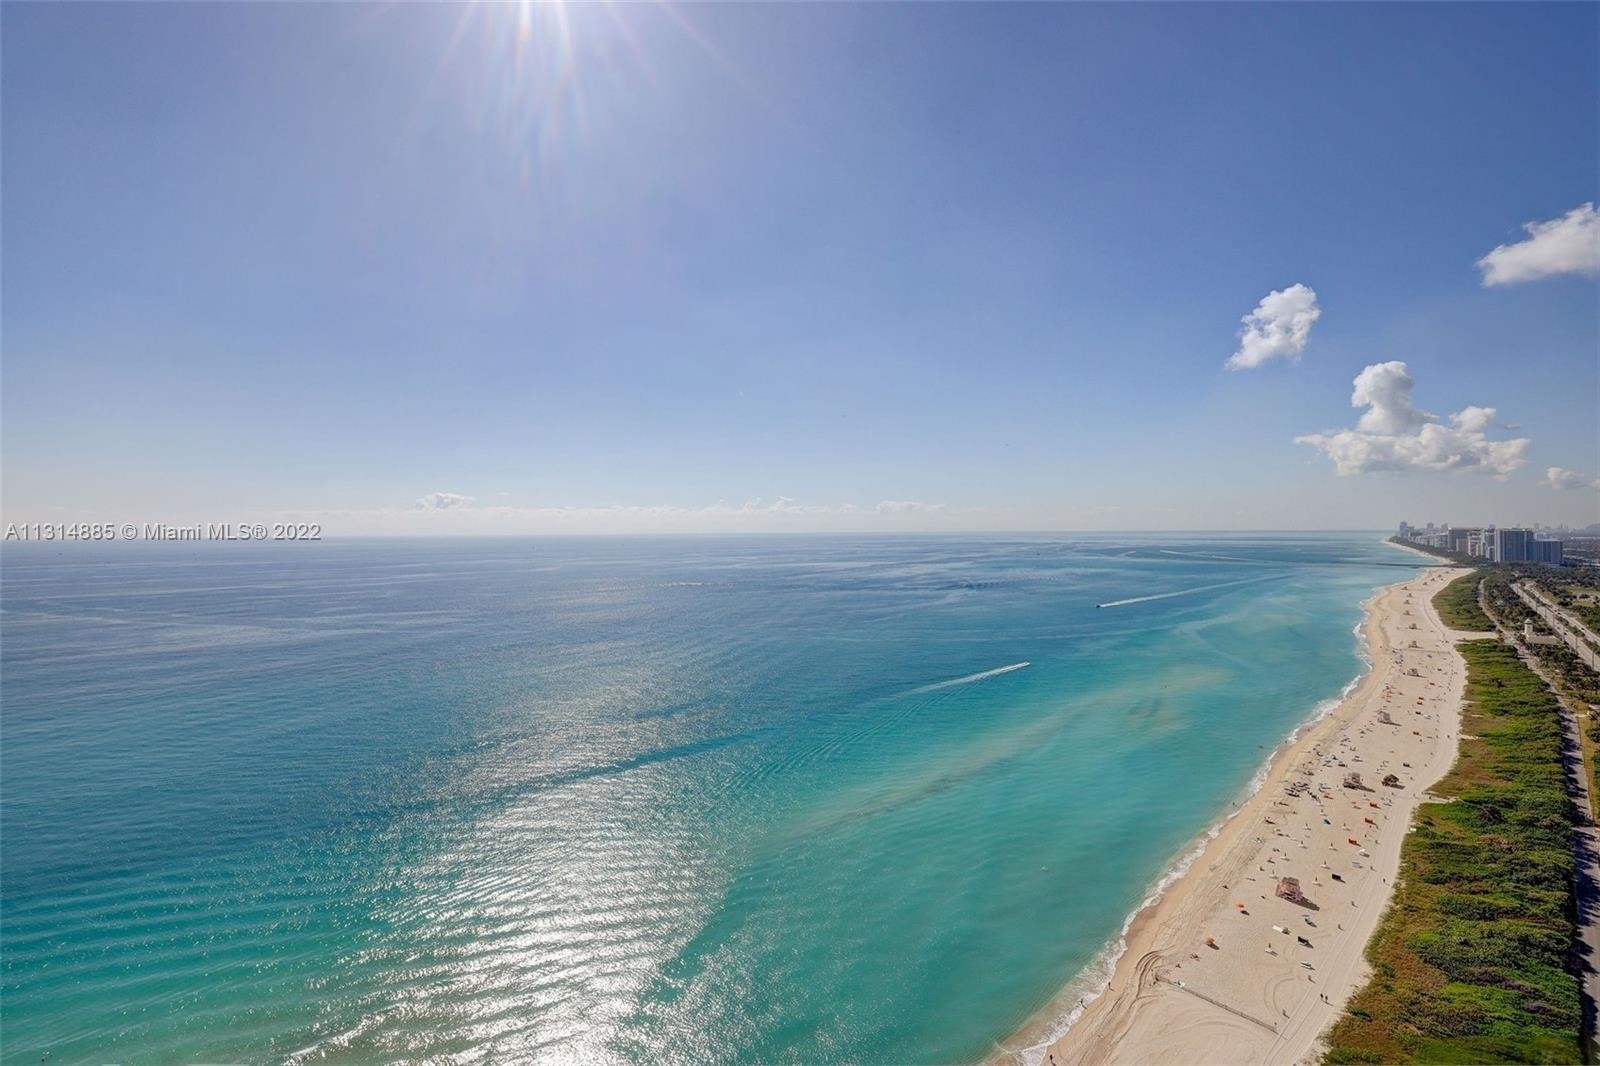 Property at 15701 Collins Ave, 601 Sunny Isles Beach, FL 33160